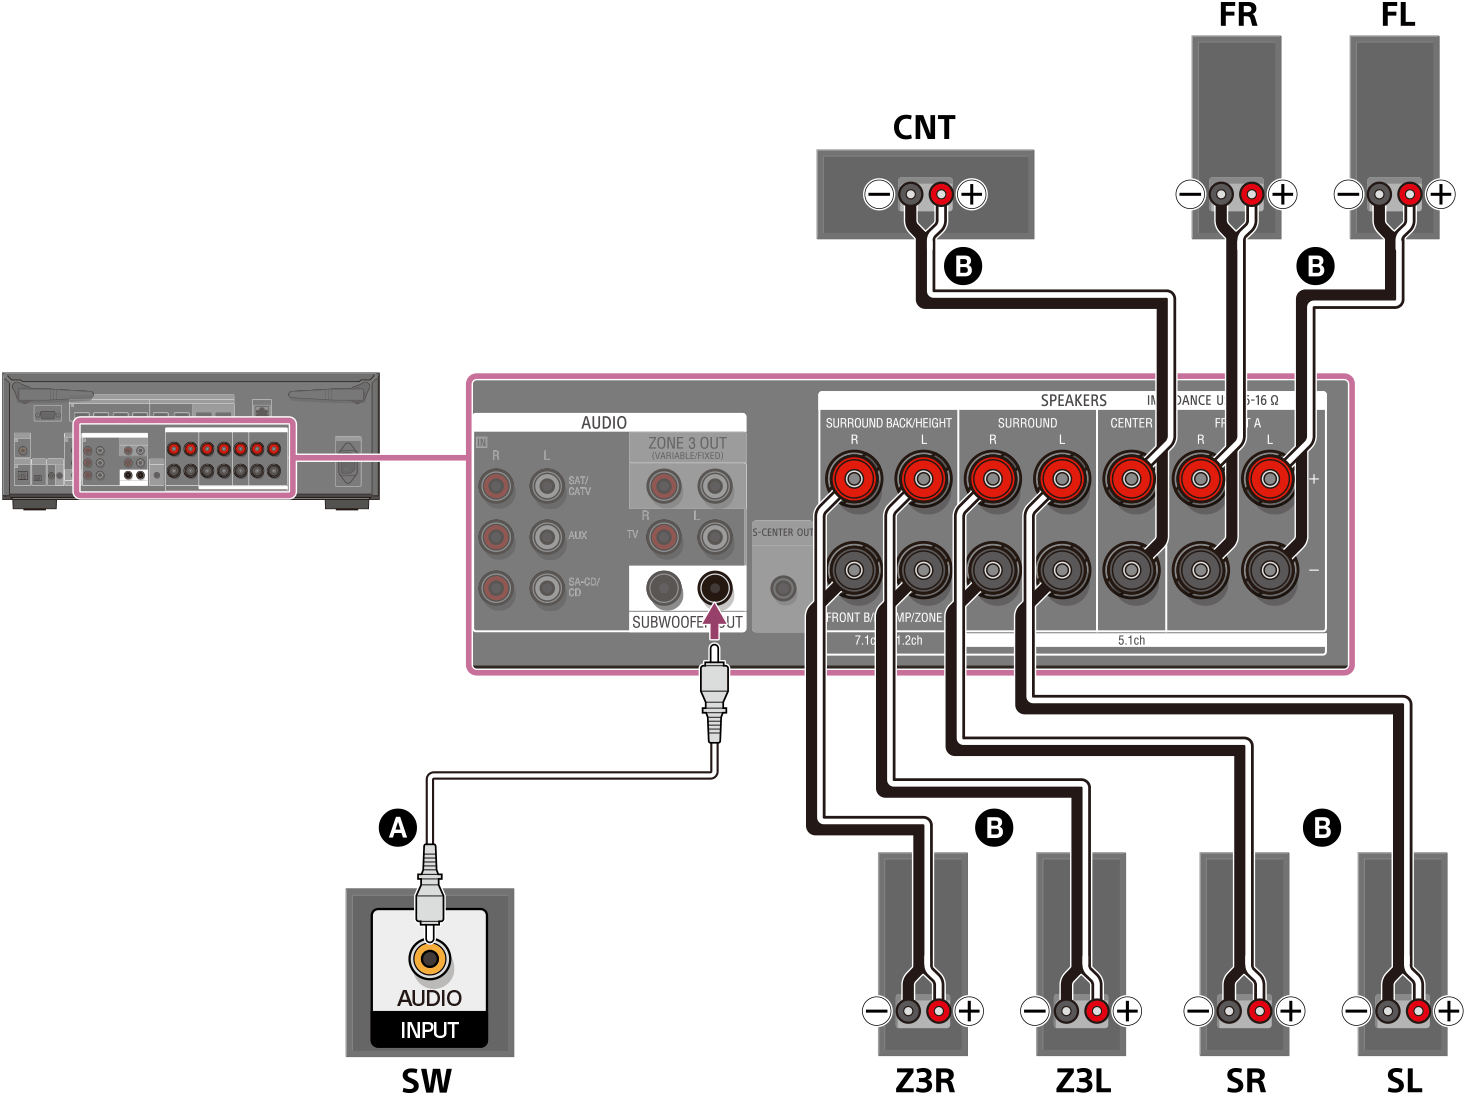 Illustration of connecting each speaker to the speaker terminals on the rear of the unit. Connect the left and right front speakers, left and right surround speakers, left and right Zone 3 speakers, and center speaker to their respective speaker terminals using speaker cables (not supplied). Connect the subwoofer to the SUBWOOFER OUT terminal with a monaural audio cable (not supplied).